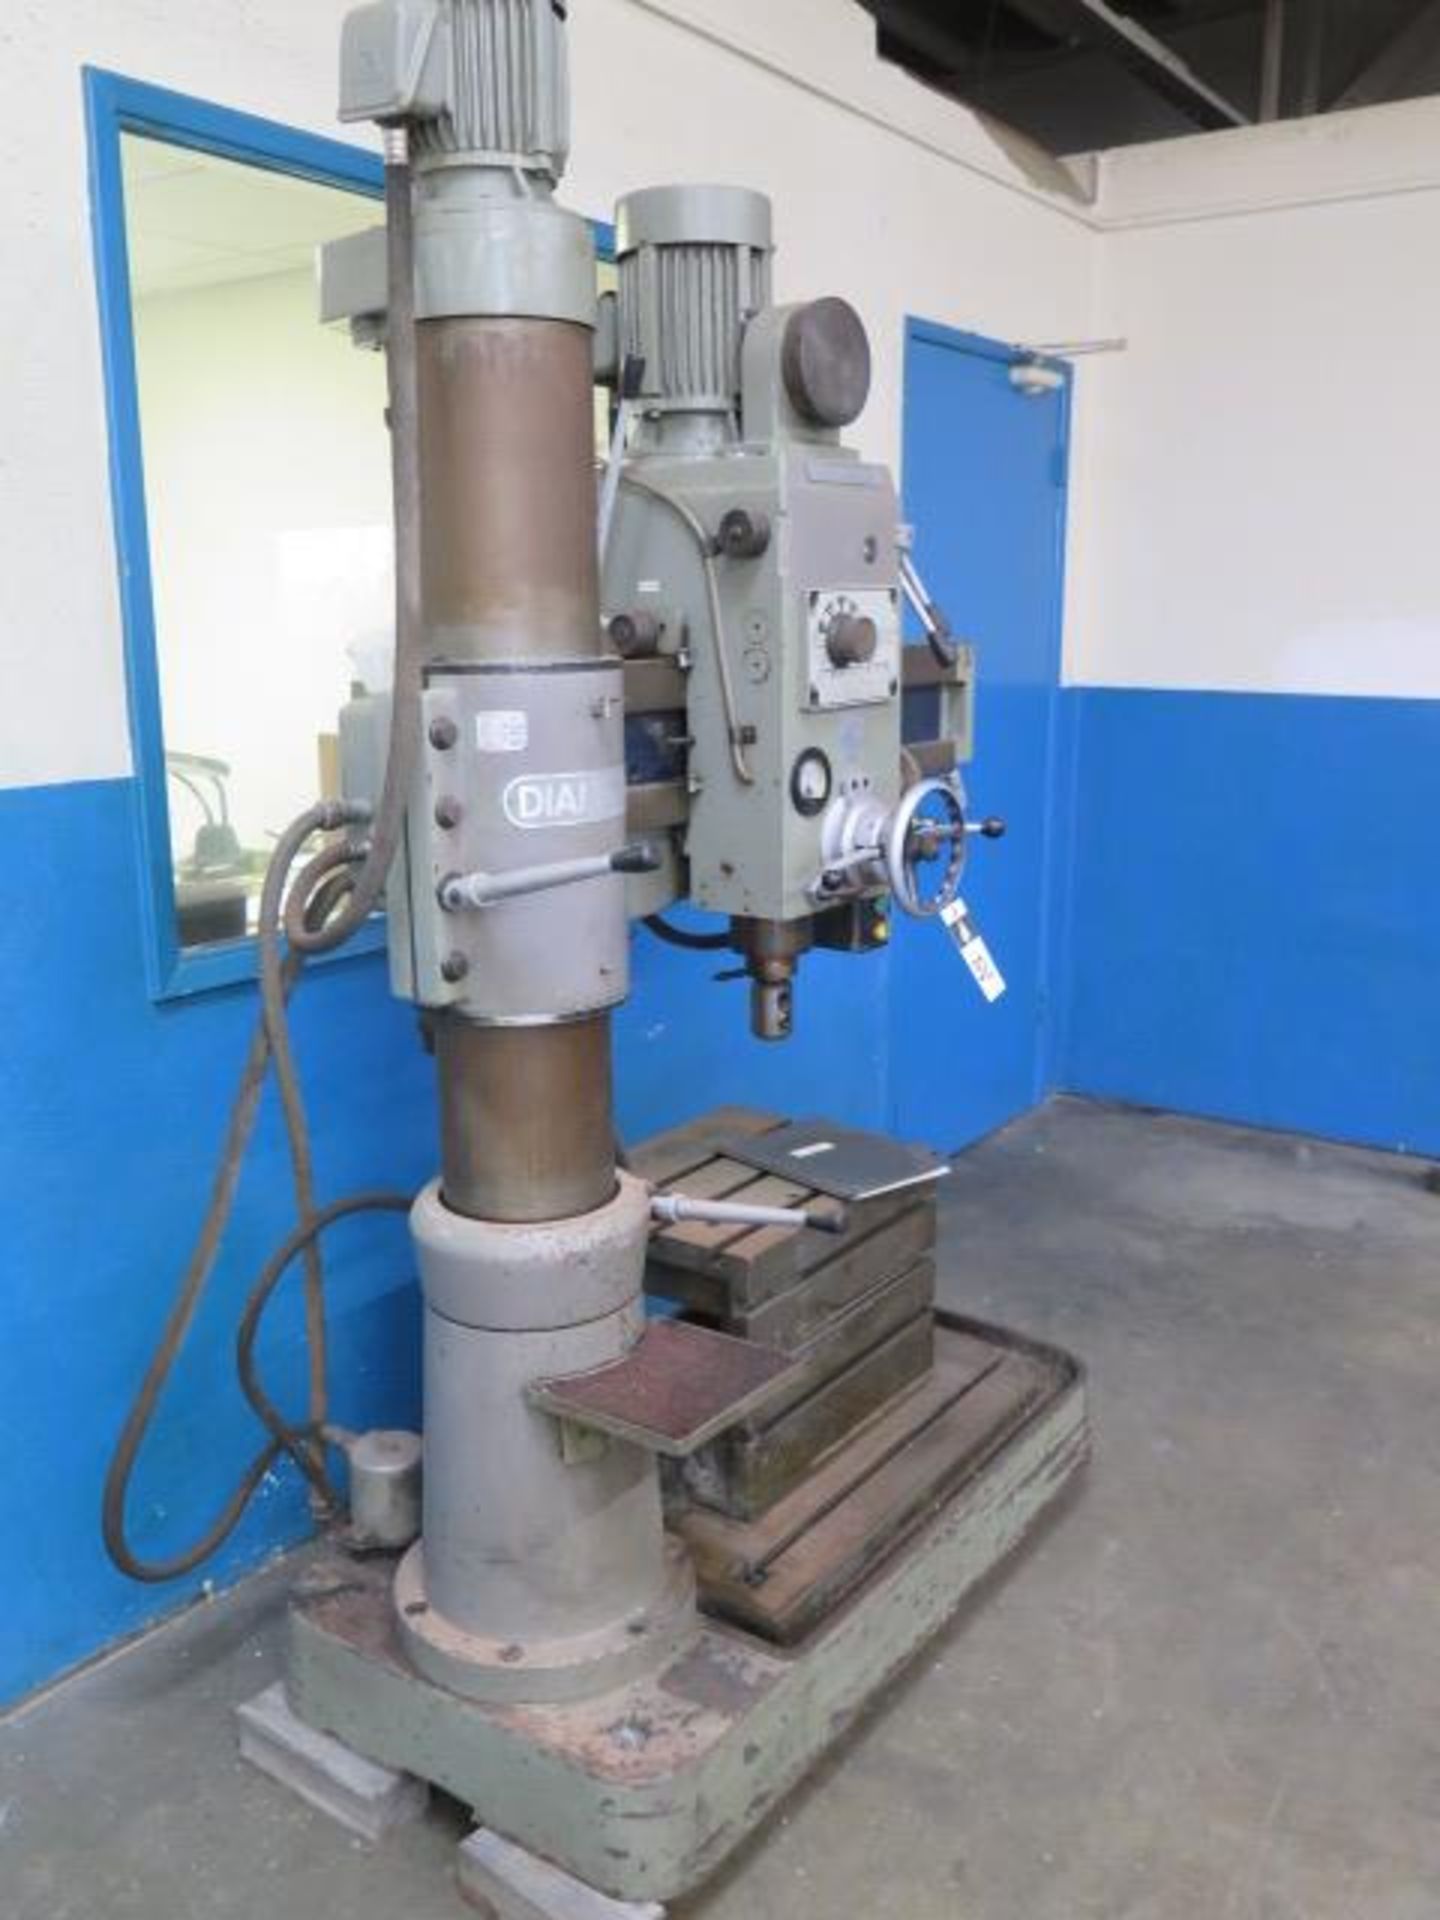 Diamond mdl. 800 “Hole Master” 8” Column x 20” Radial Arm Drill s/n 13322 w/ 88-1500 RPM, SOLD AS IS - Image 2 of 13